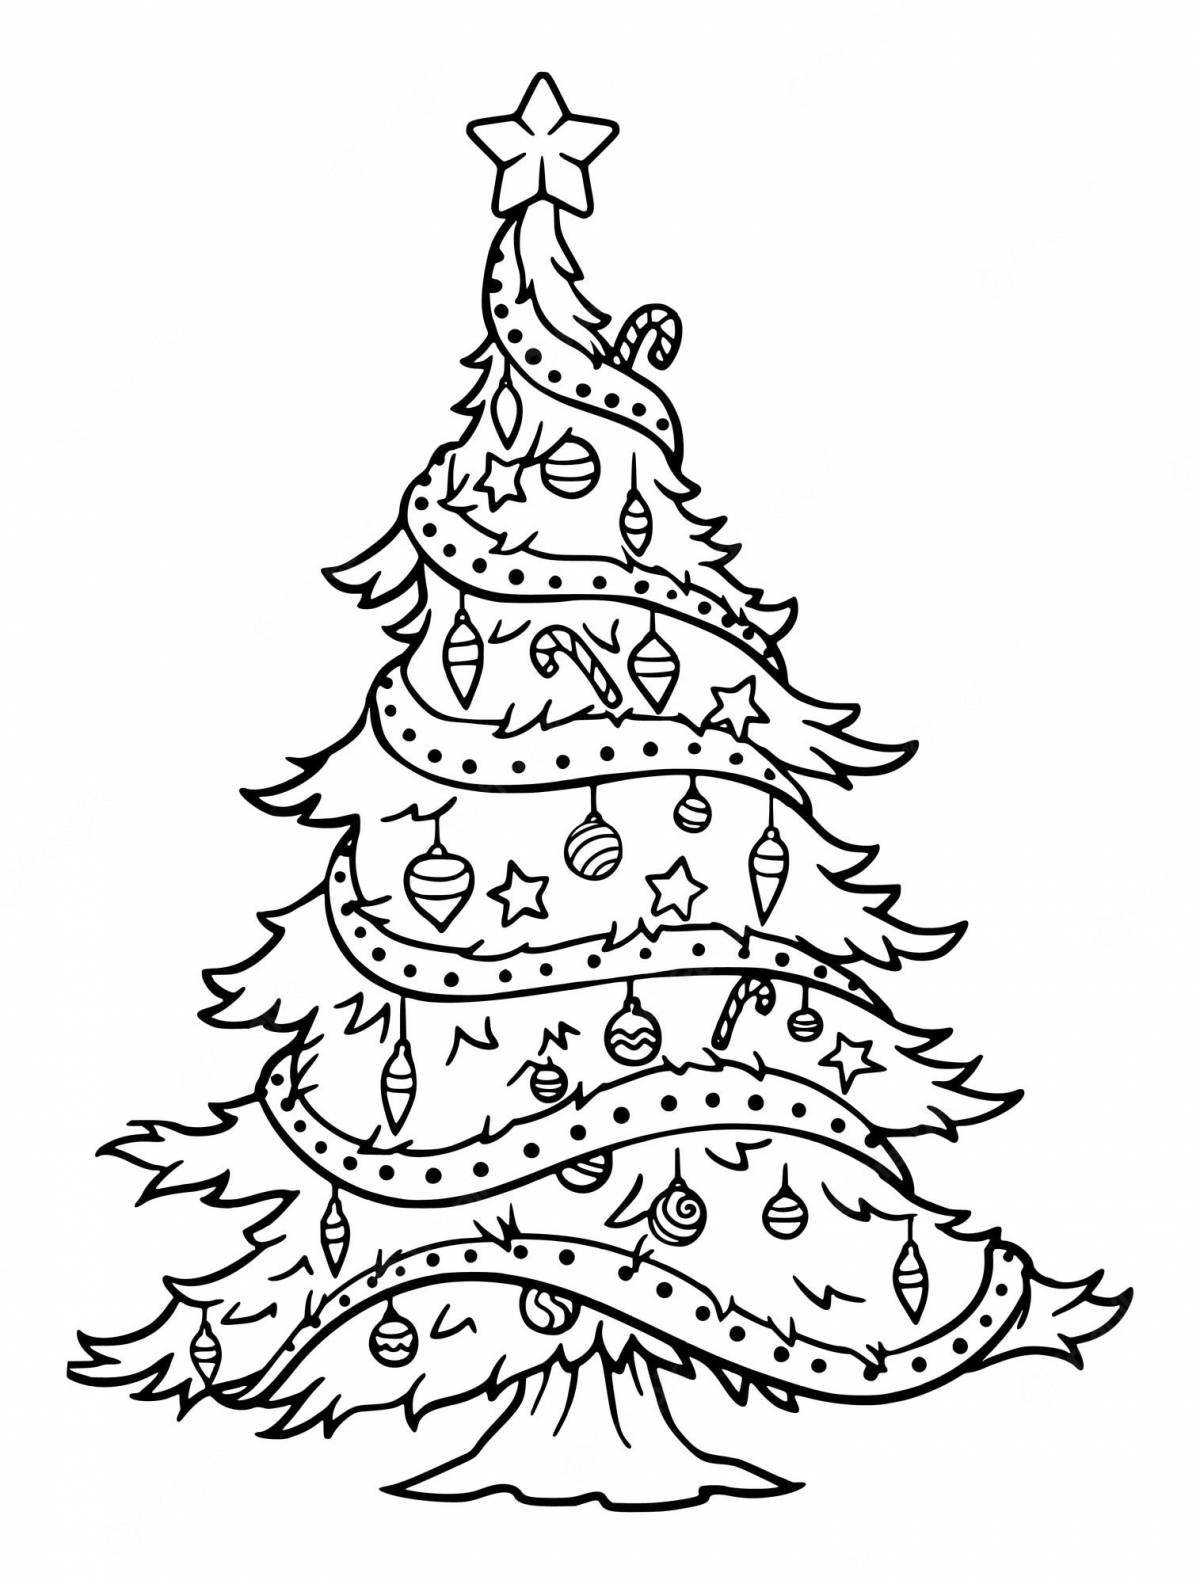 Colorful christmas tree coloring page for kids